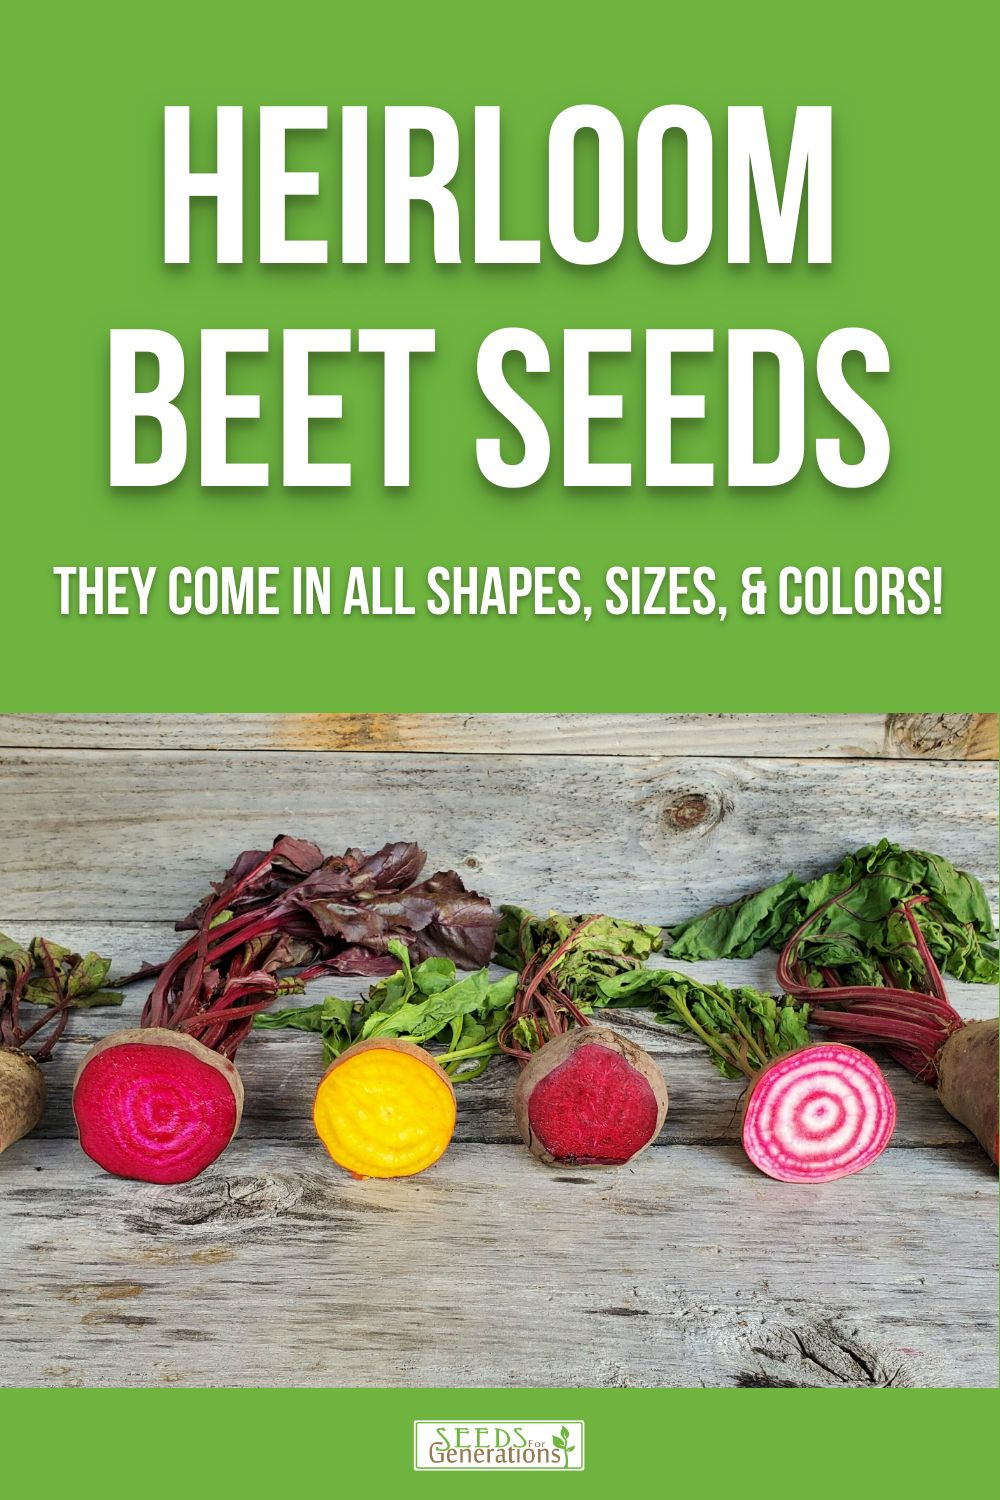 Heirloom Beet Seeds, they come in all shapes, sizes, and colors! 